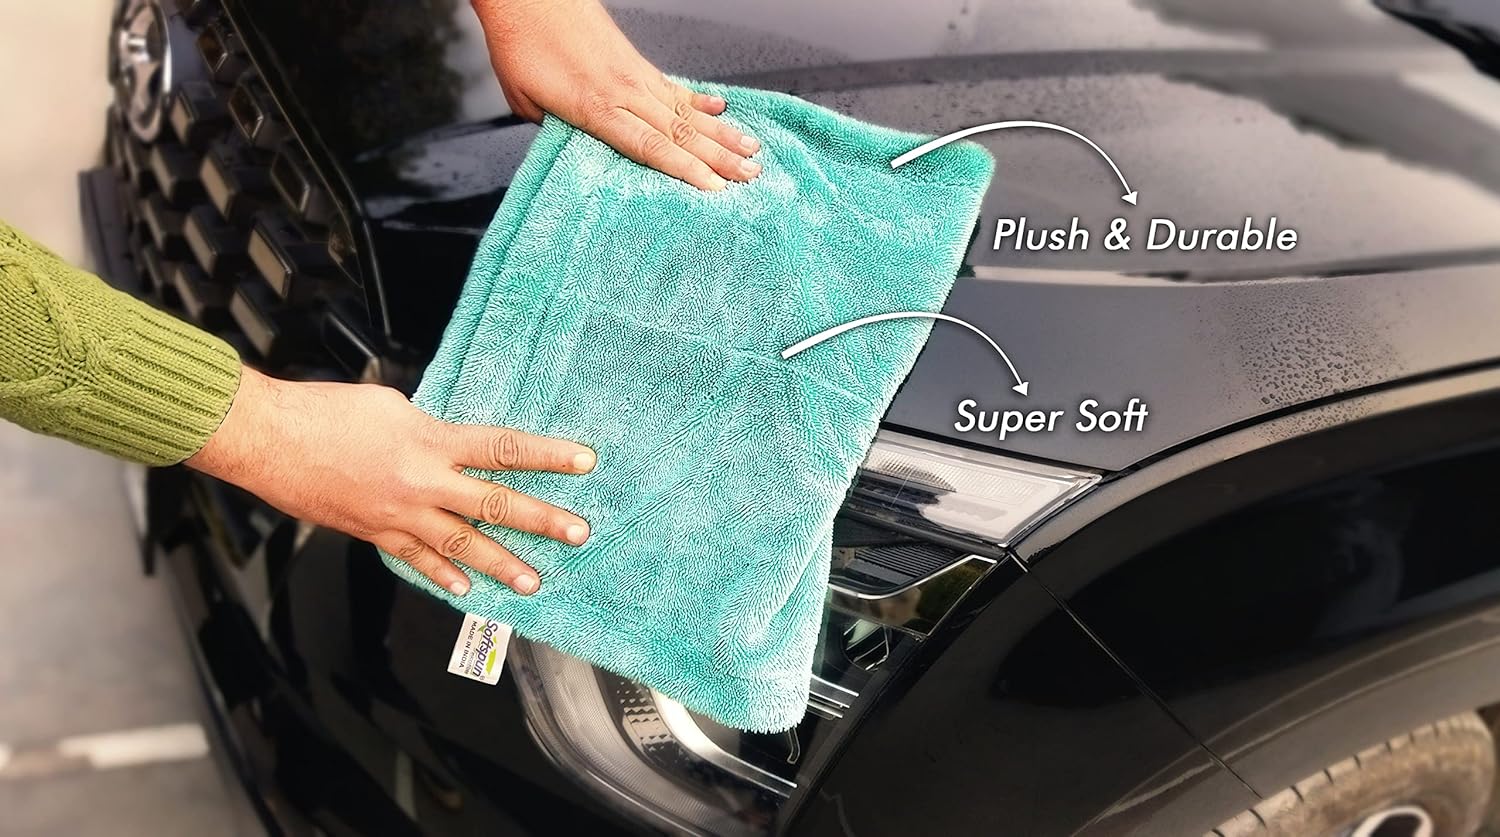 SOFTSPUN Microfiber Cloth for Car - 1200 GSM, 1Pcs, Twisted Loop Super Absorbent Towel - Plush Pile and Lint Free Cloth for Drying and Detailing.